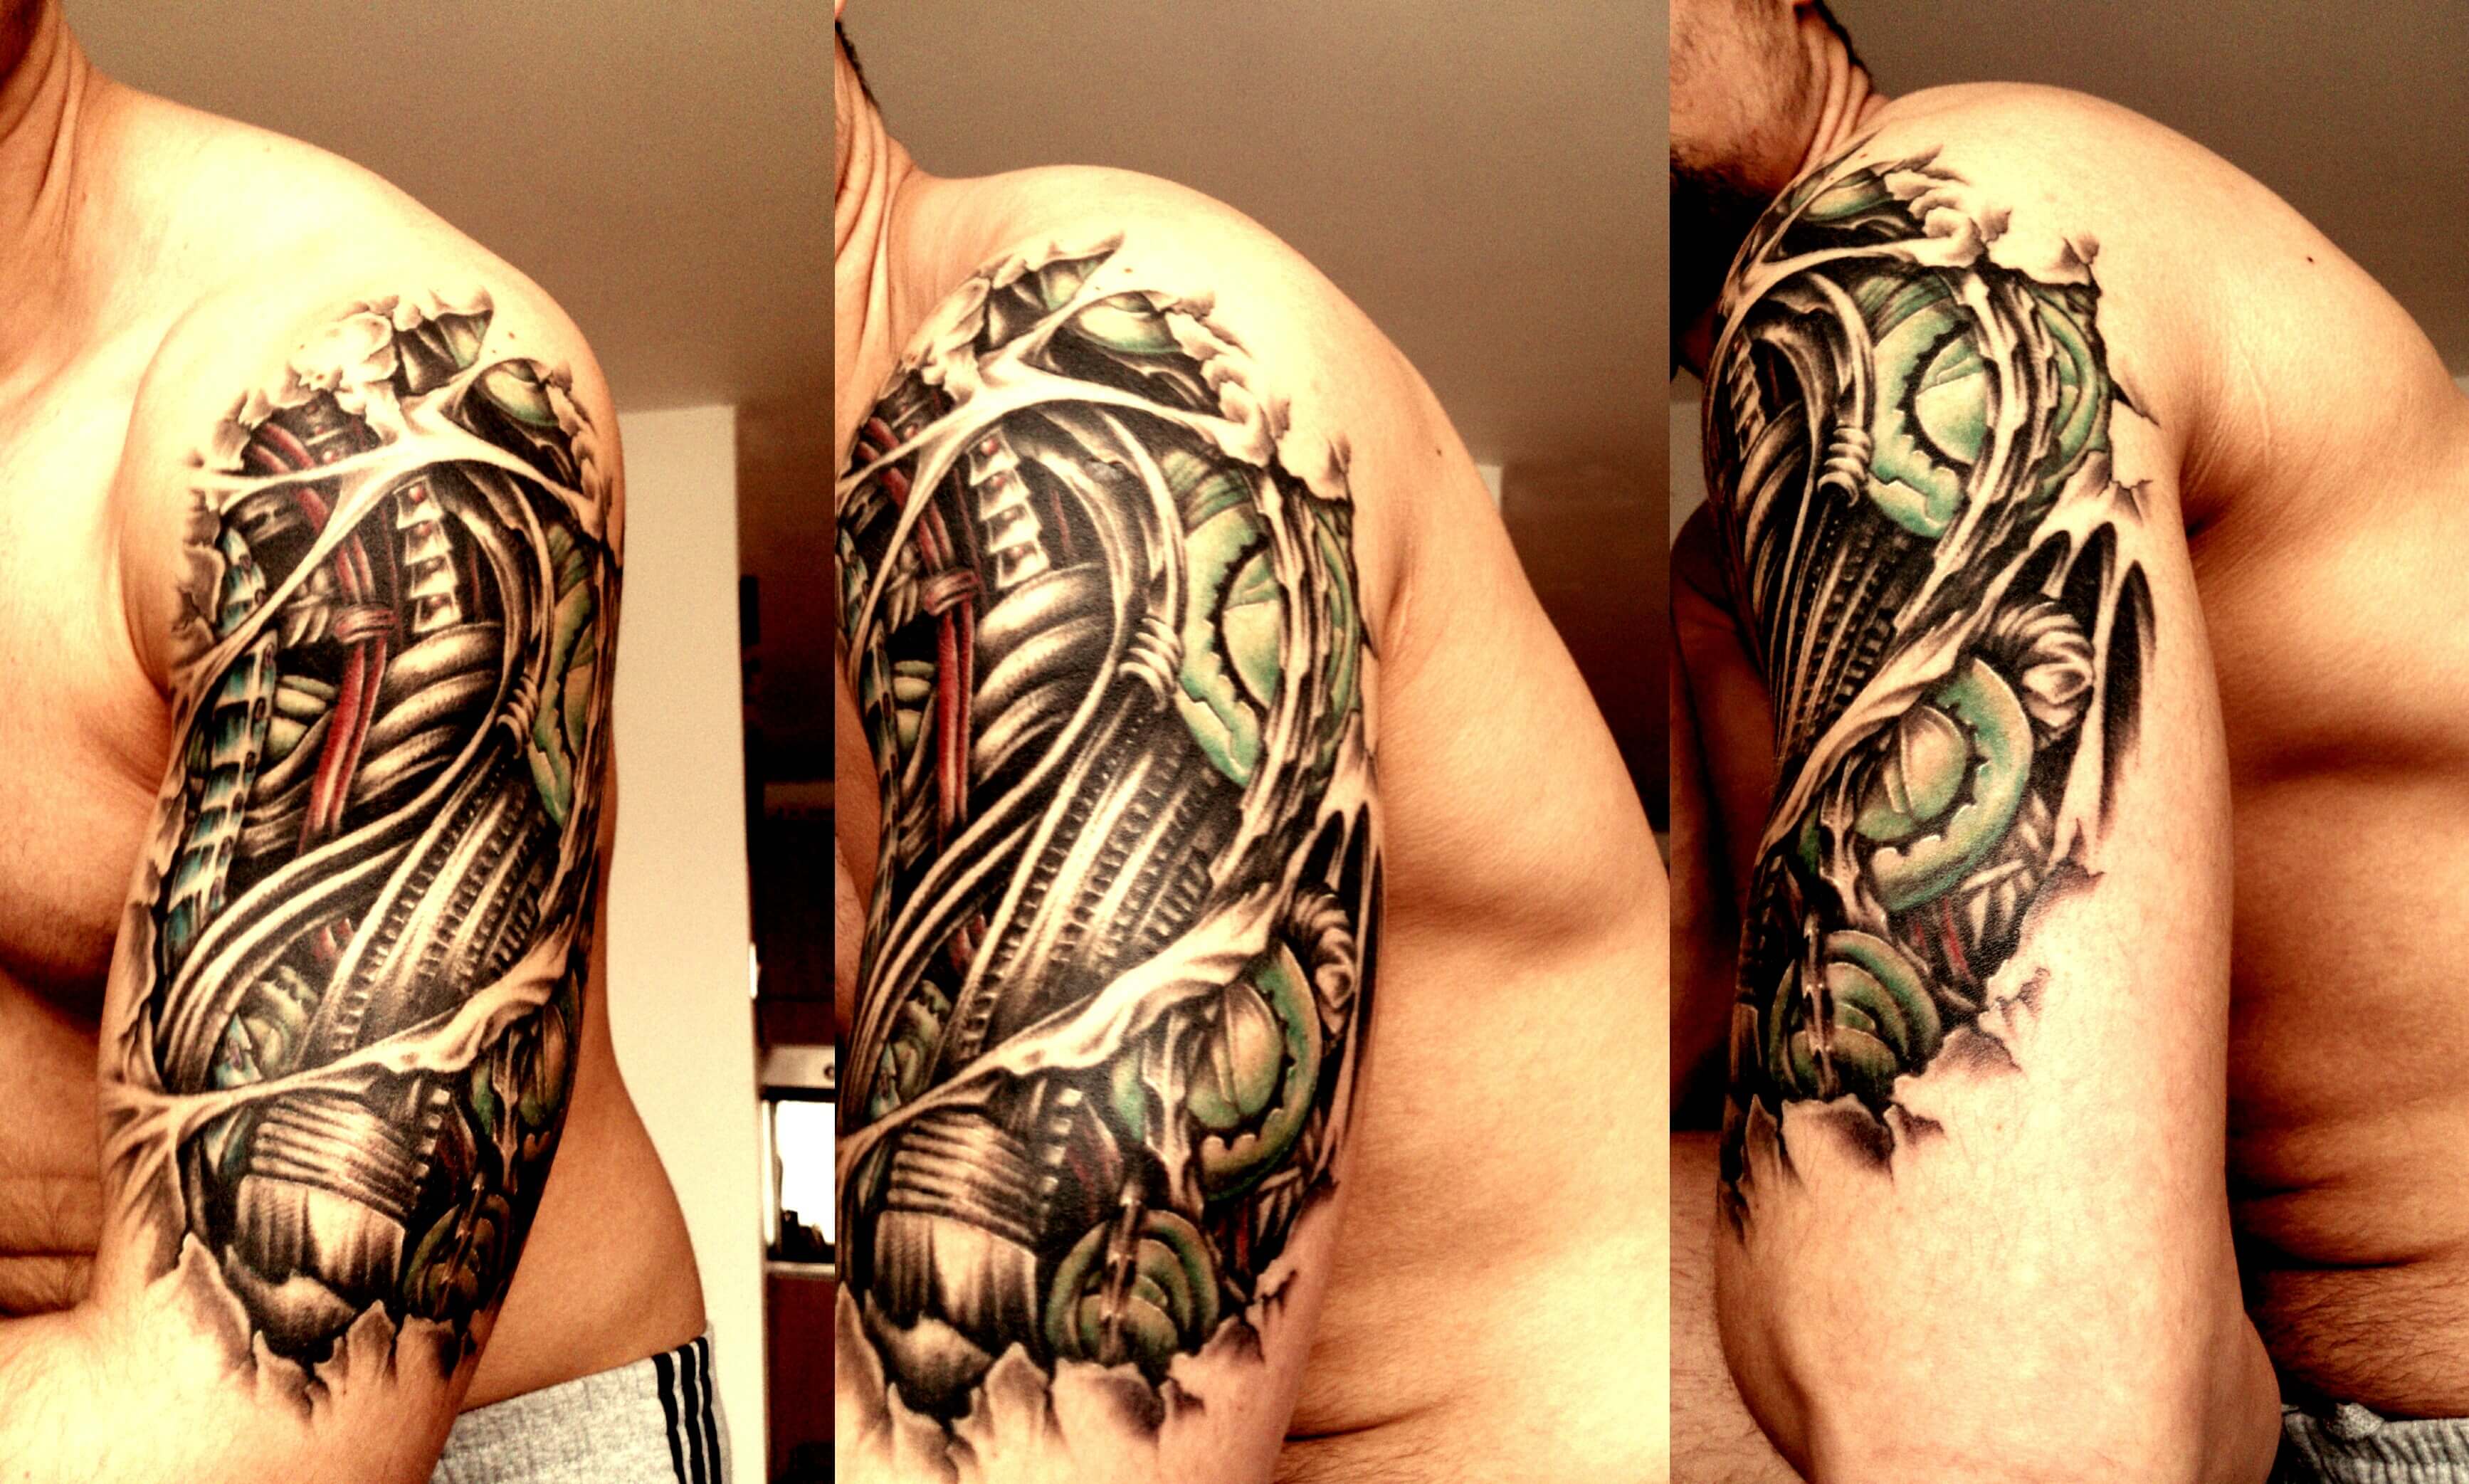 Biomechanical arm tattoo cover up work in progress by will1969 on DeviantArt